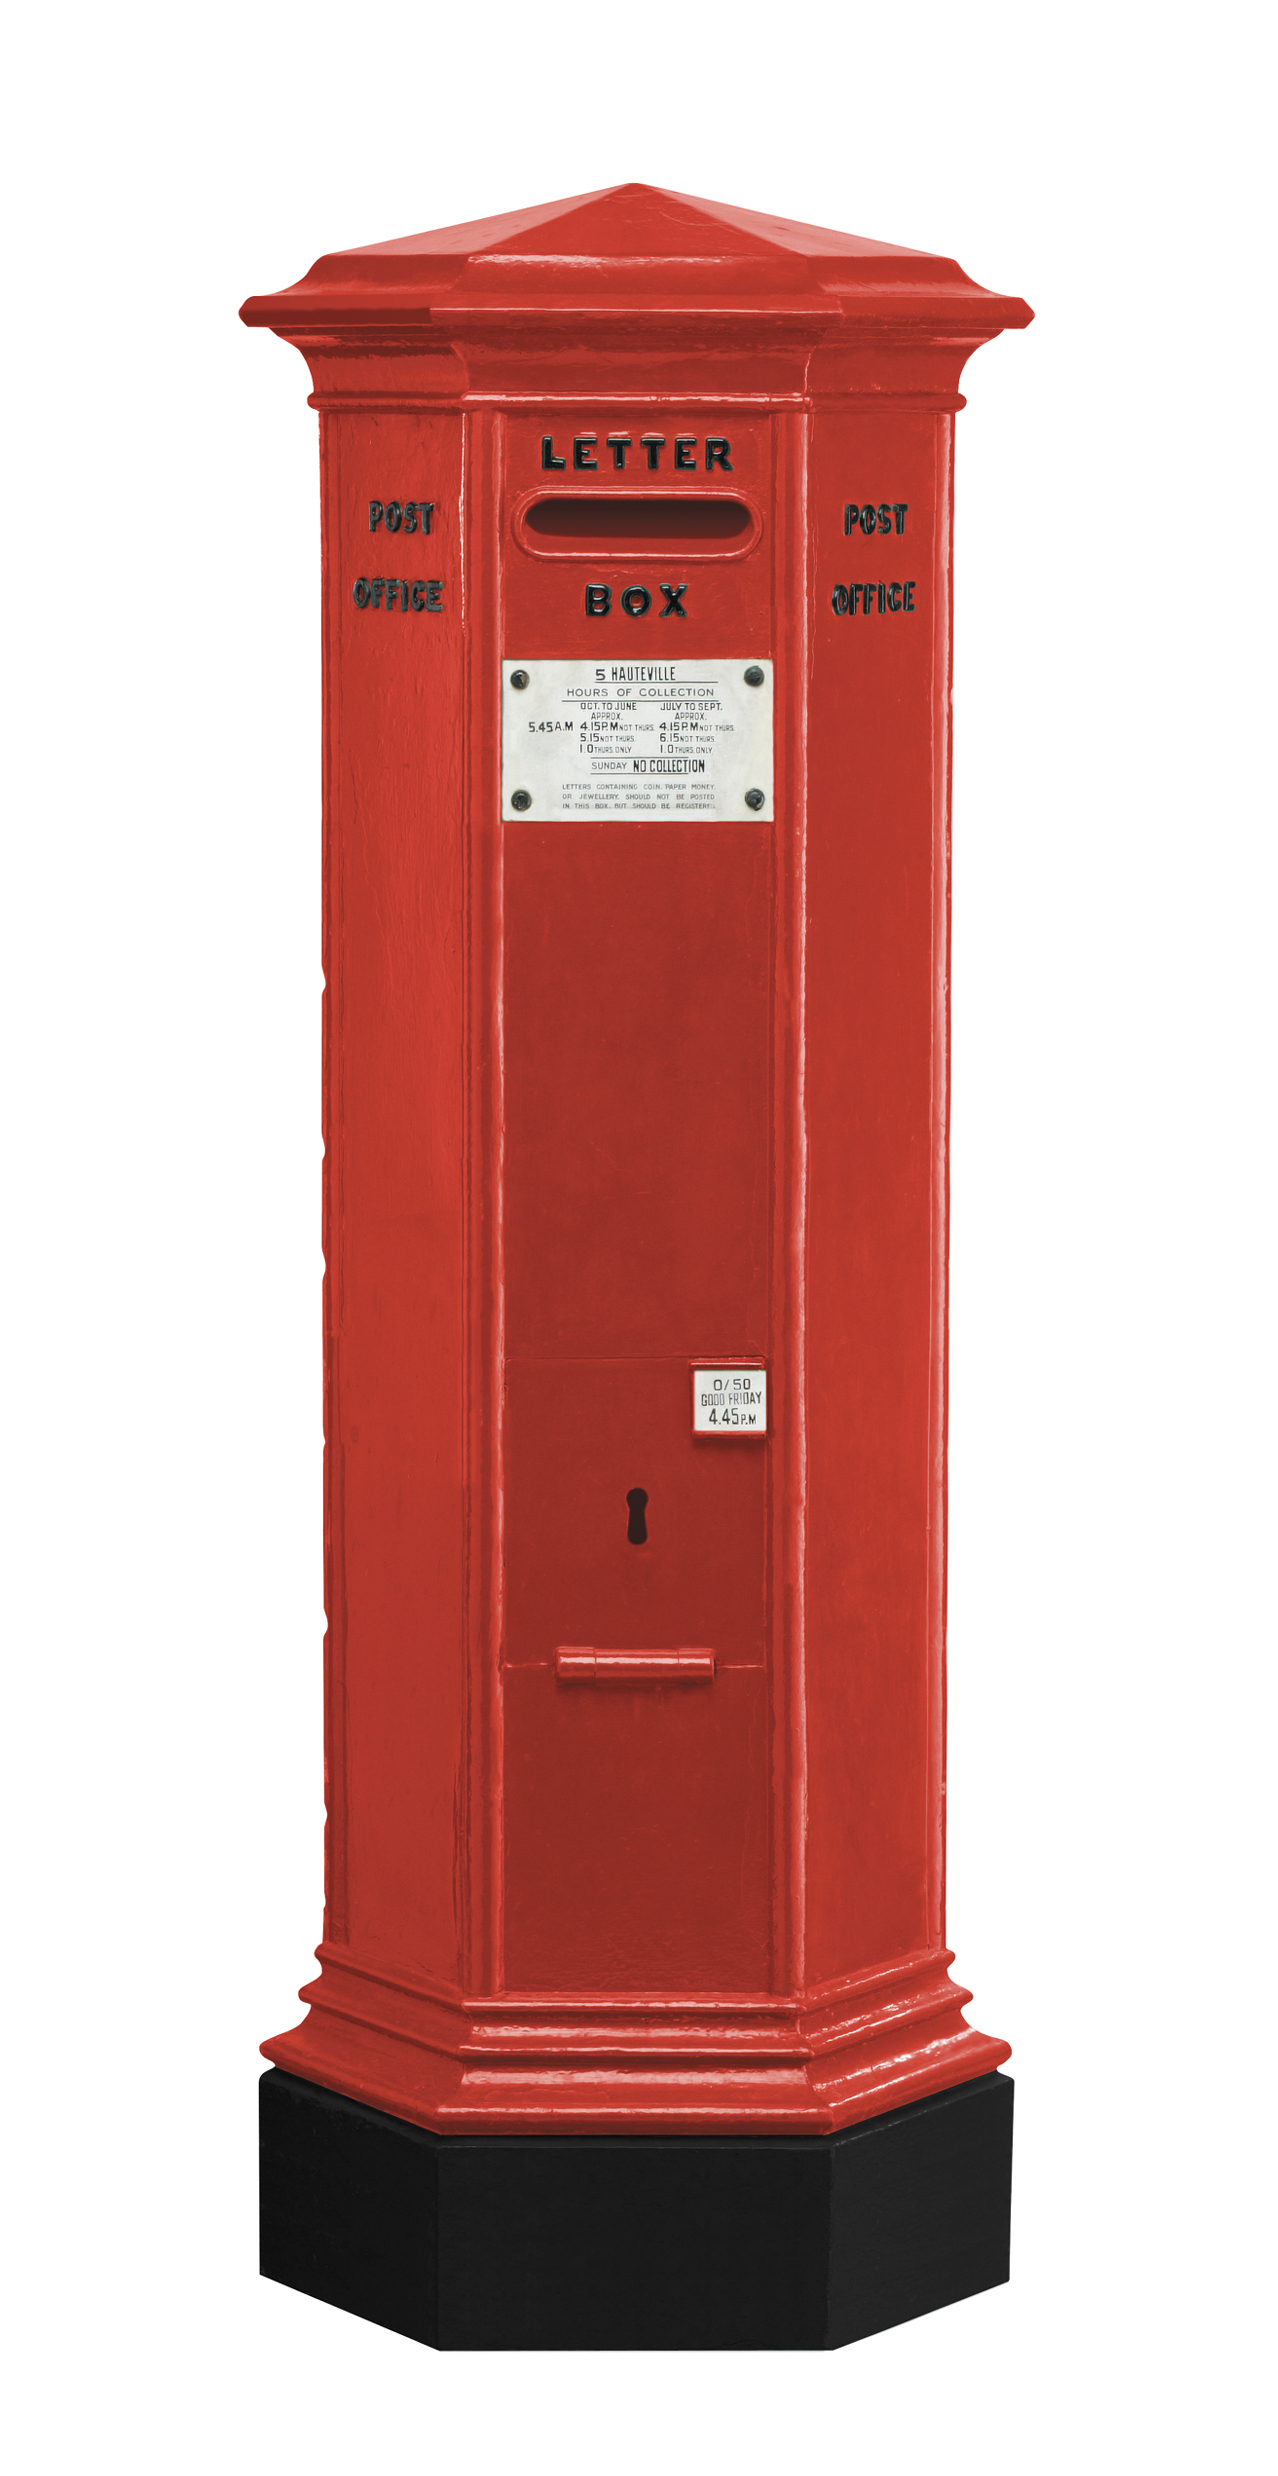 Evolution of The Post Box - The Postal Museum